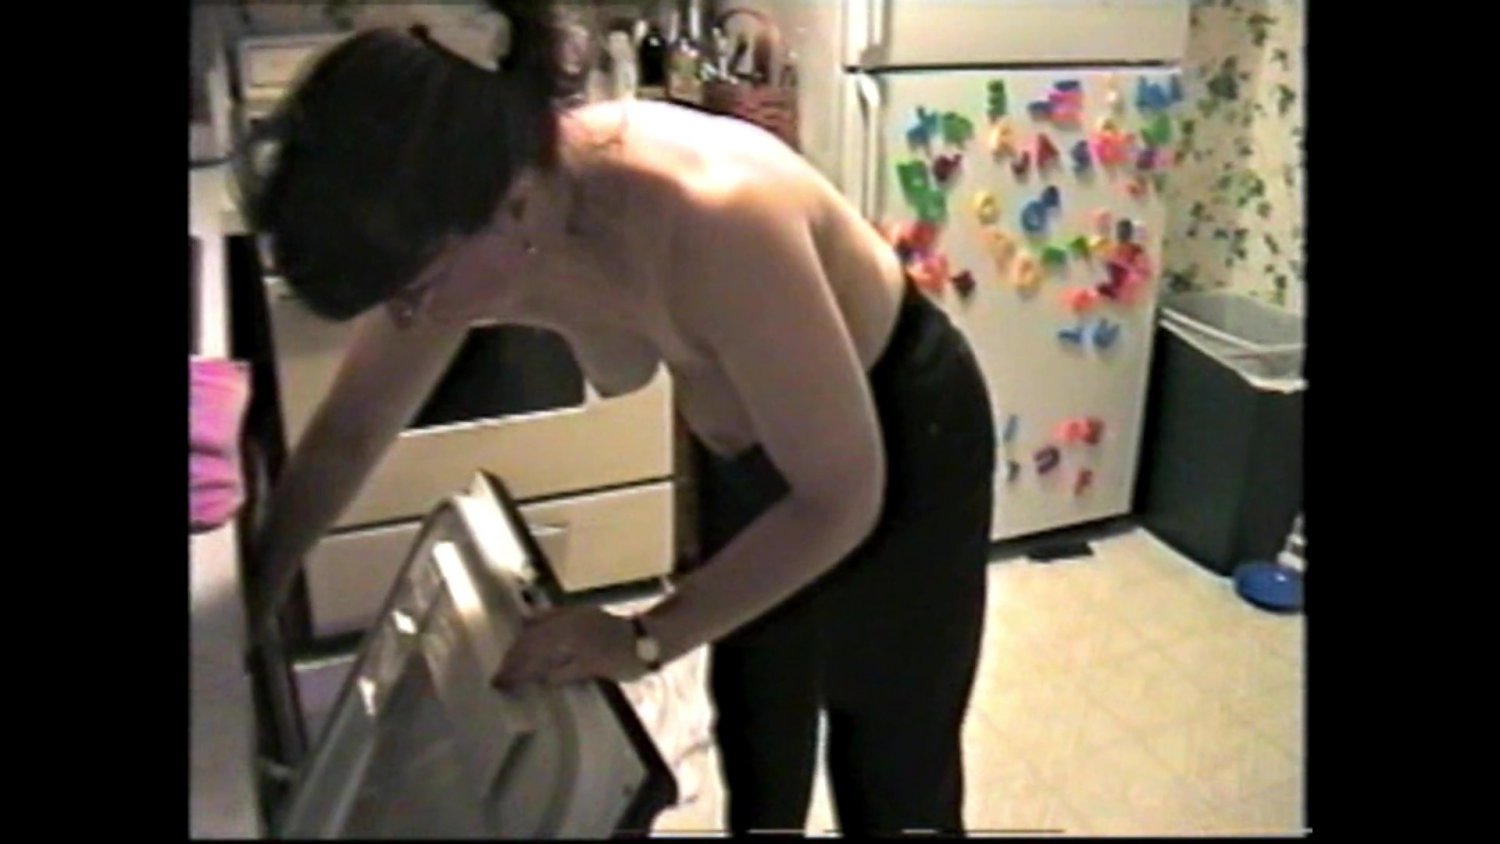 Found a video of my ex-wife doing someones dishes topless for... picture